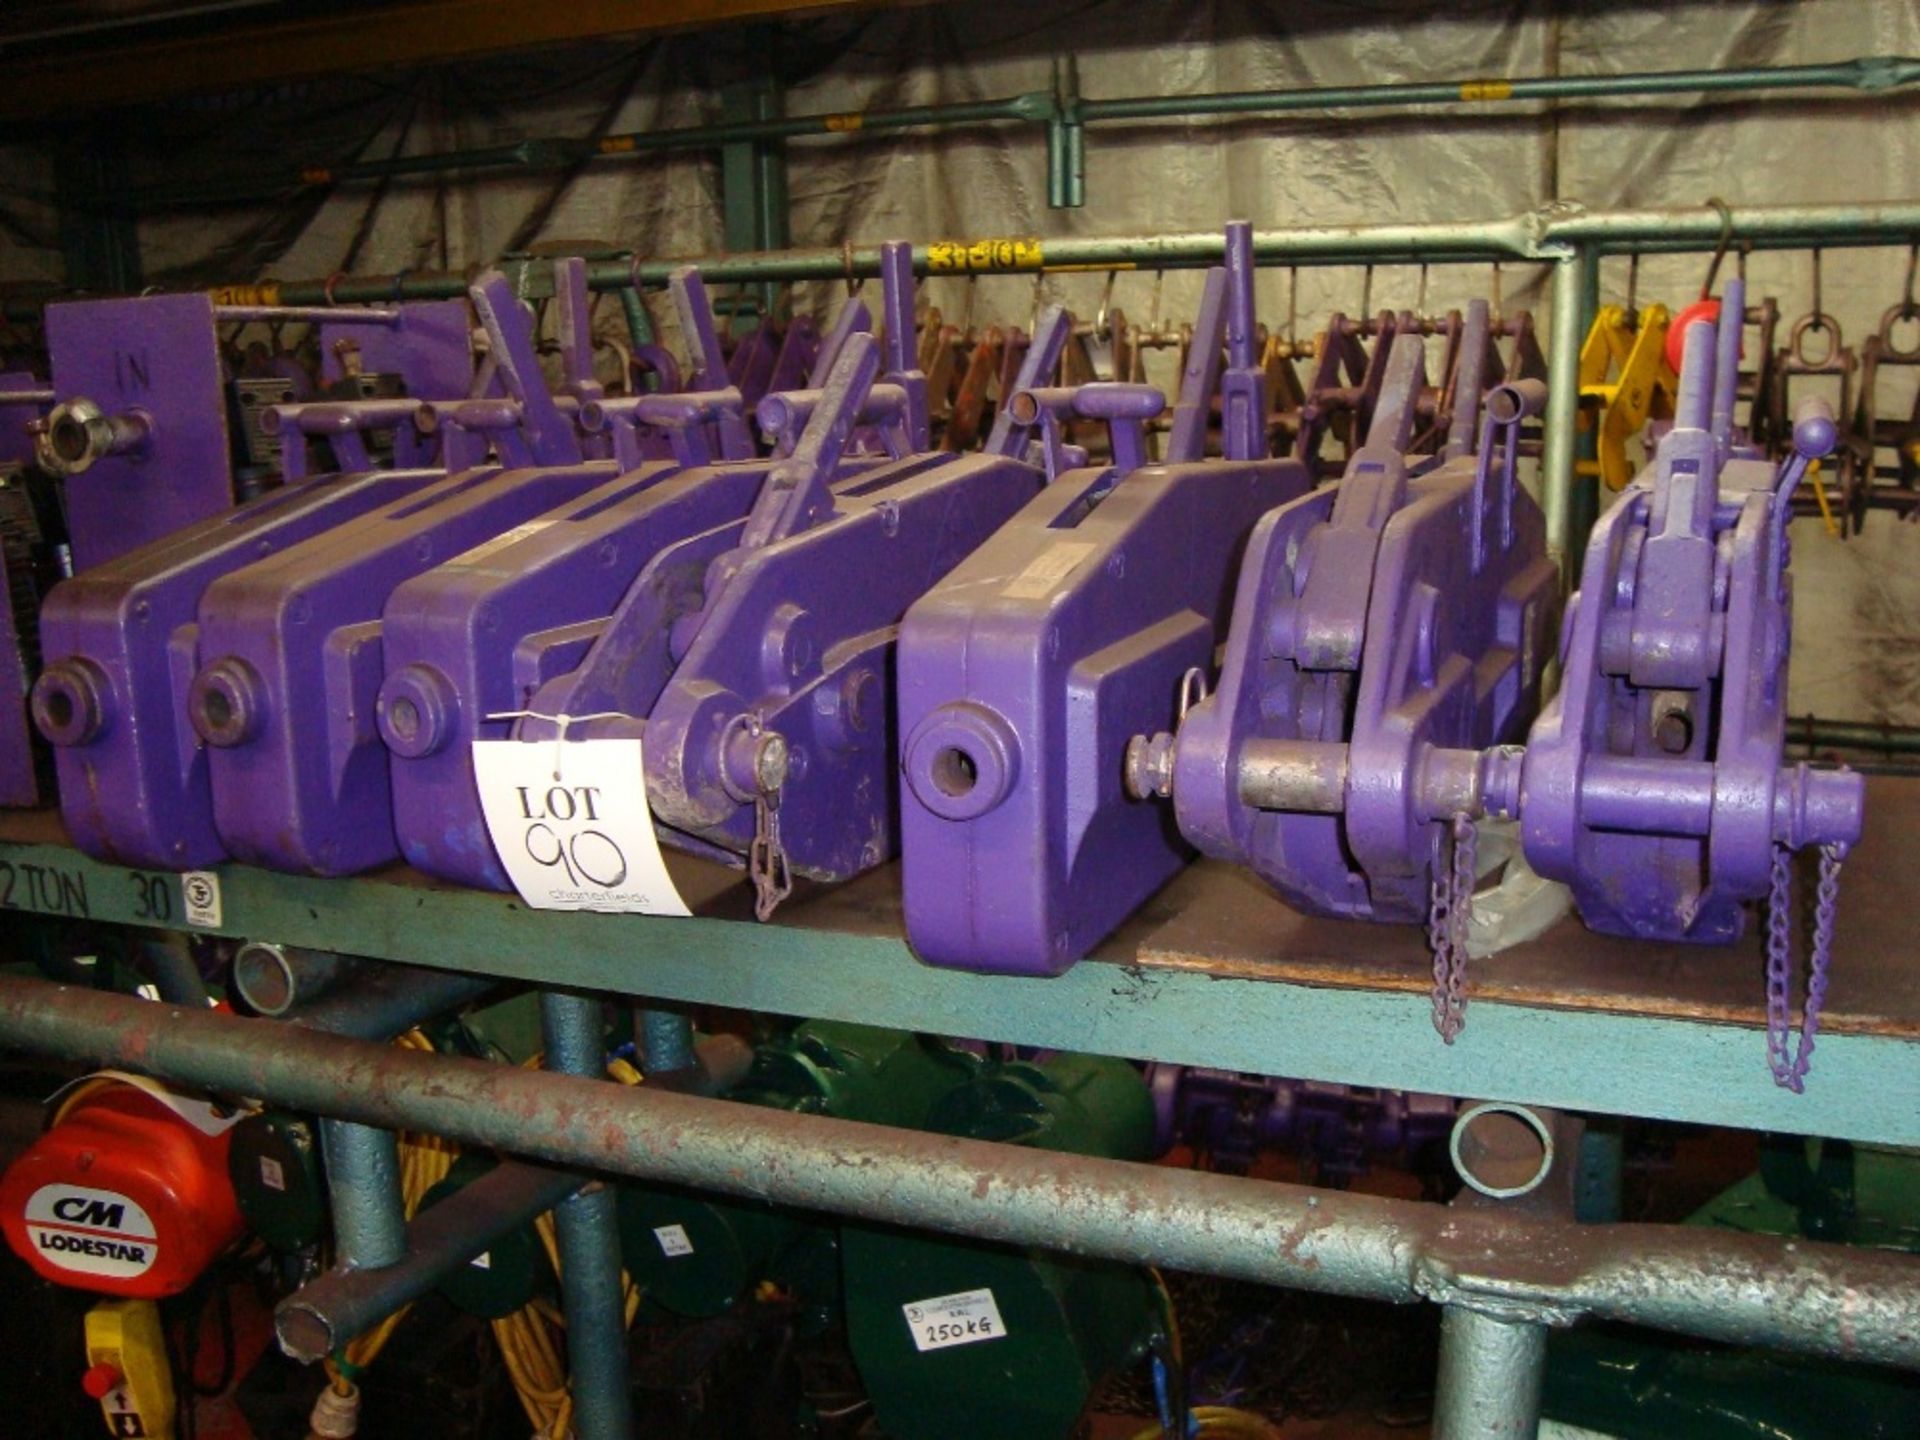 A quantity of approximately 18 Tirfor 1.5 tonne to 3 tonne pulling machines with cable stocks, as